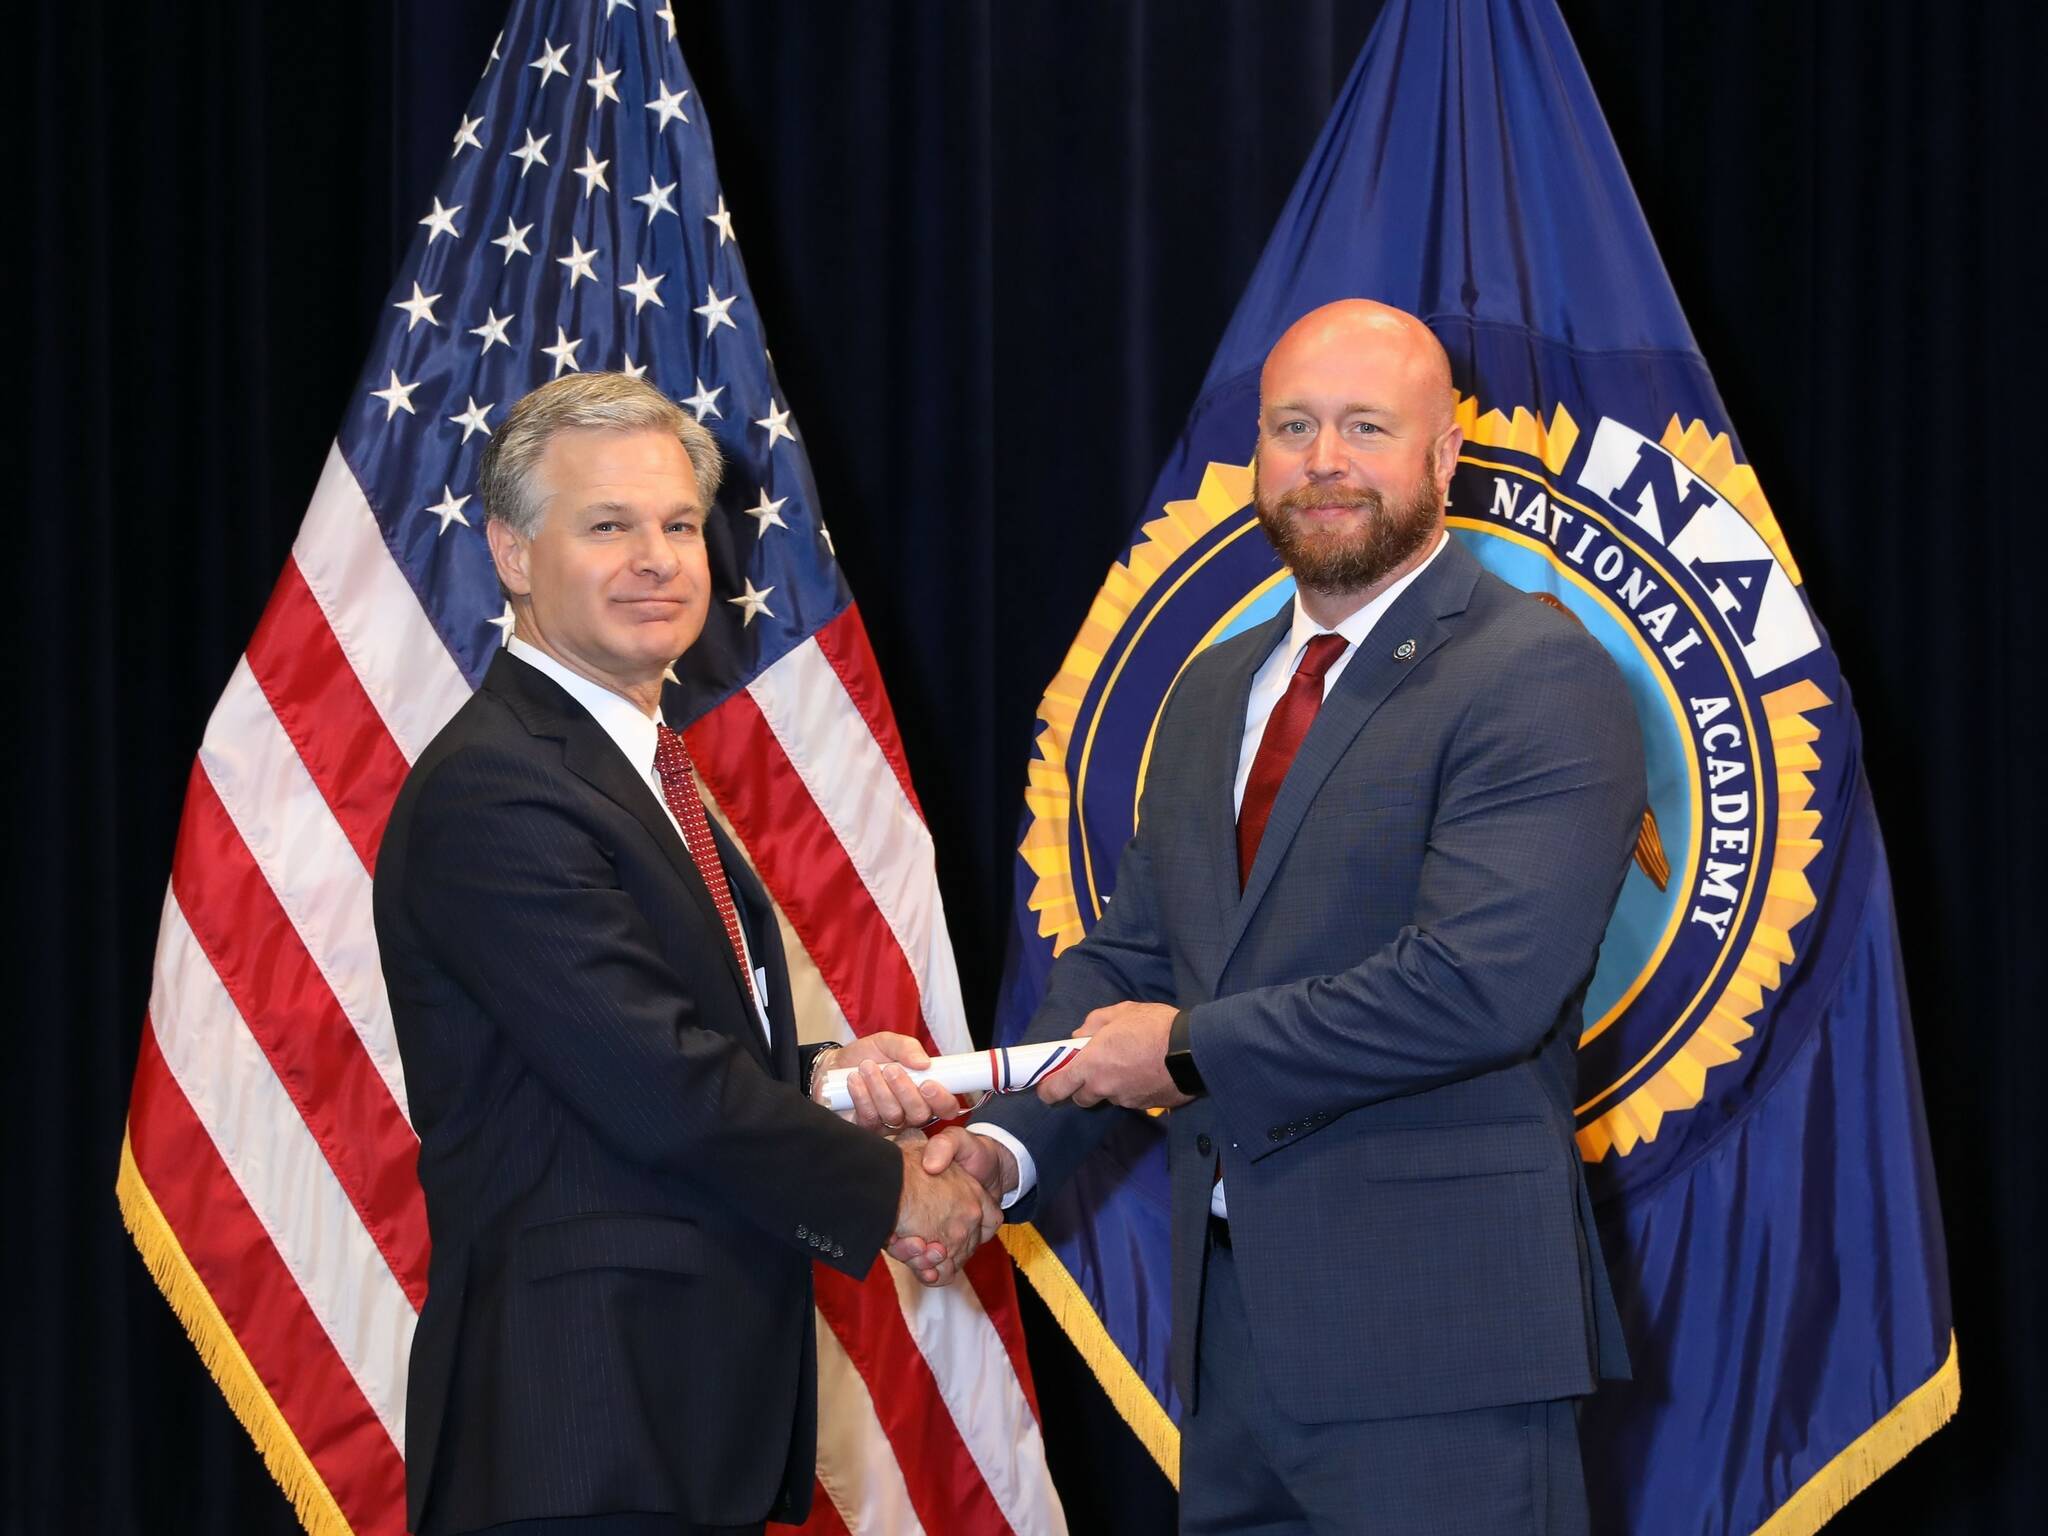 From left, FBI Director Christopher Wray presents Mercer Island Police Department Operations Commander Mike Seifert with his diploma after graduating from the FBI National Academy in Quantico, Virginia, last month. Photo courtesy of the Mercer Island Police Department